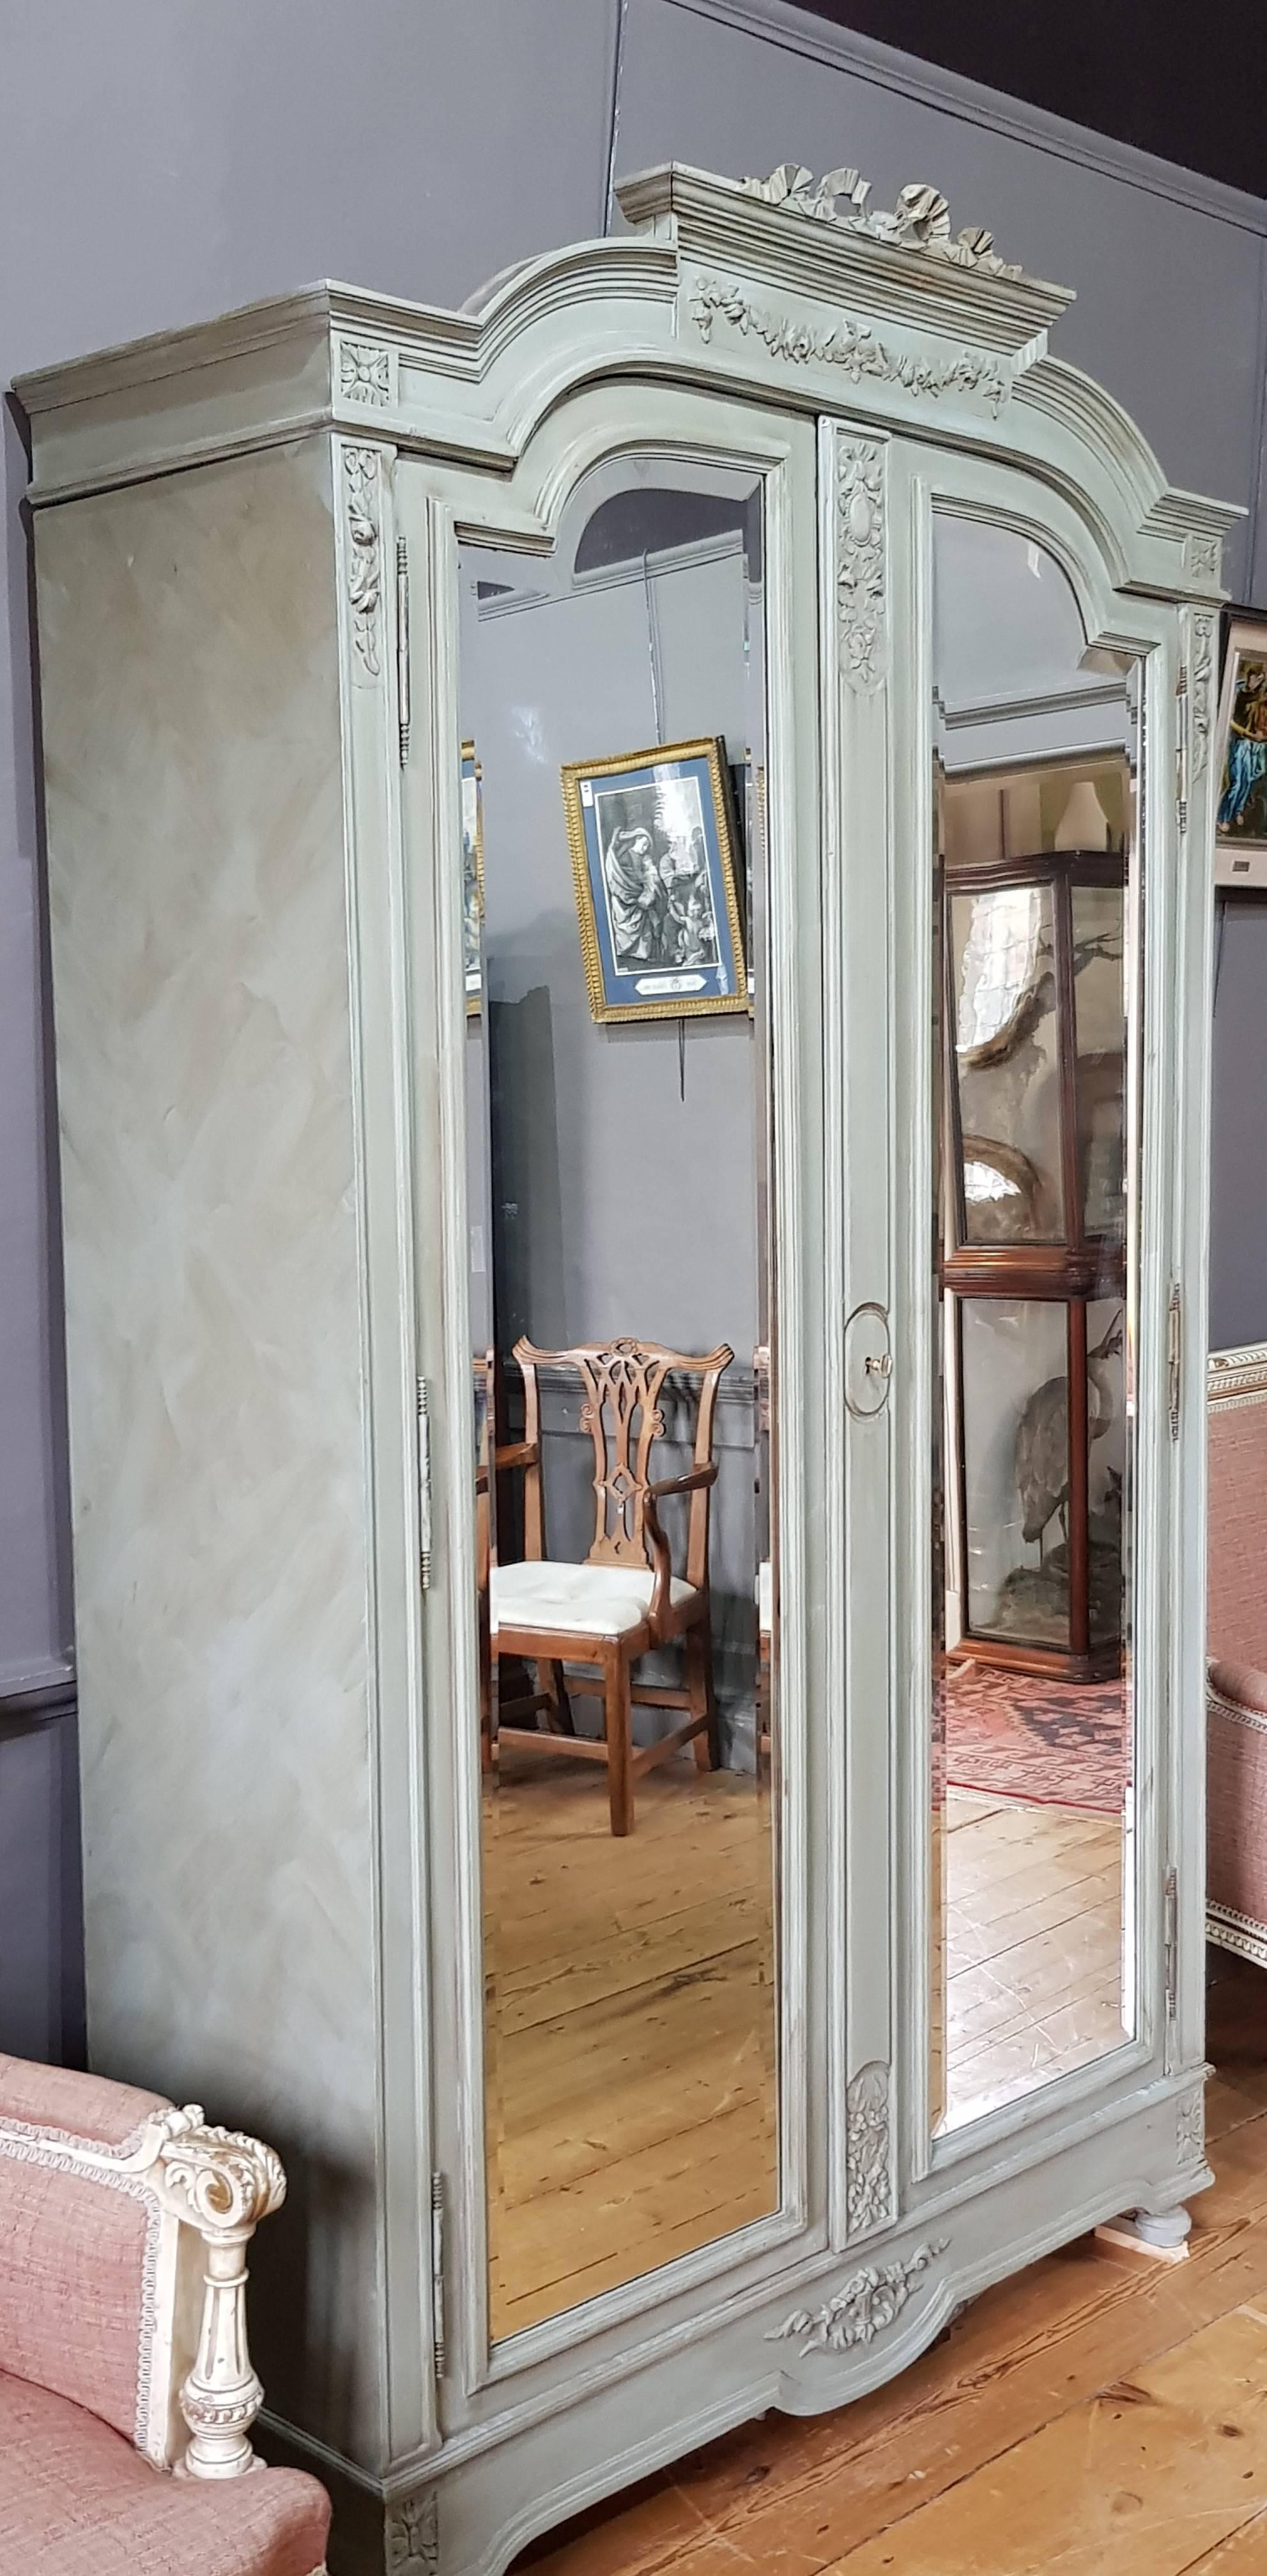 A good quality 19th century painted and distressed mirrored door armoire.
Will completely flat pack for transport.